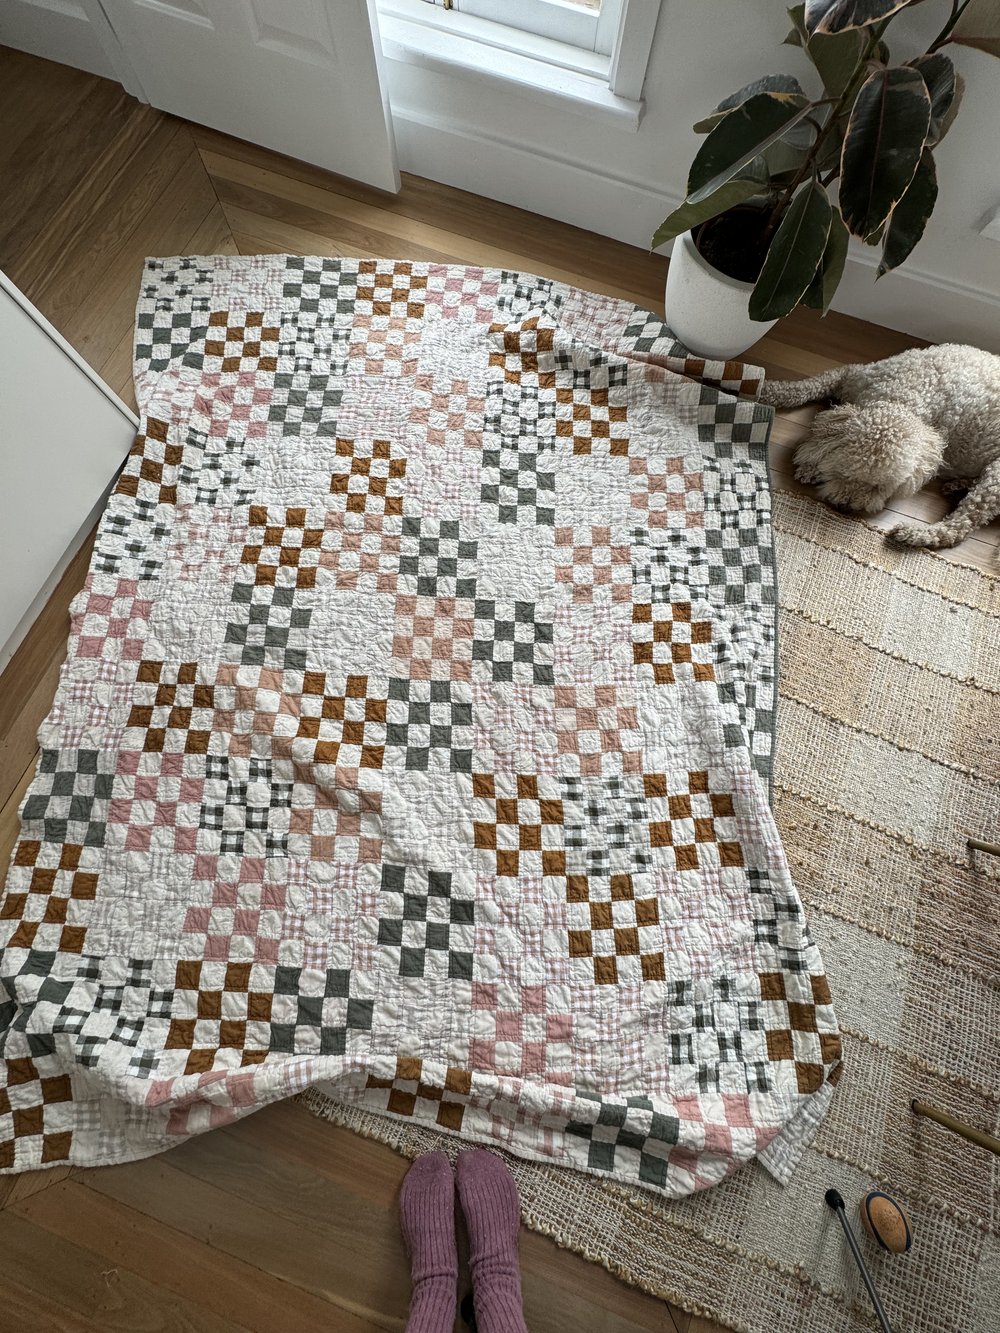 How to make: A Checkered Squares Quilt — Joz Makes Quilts